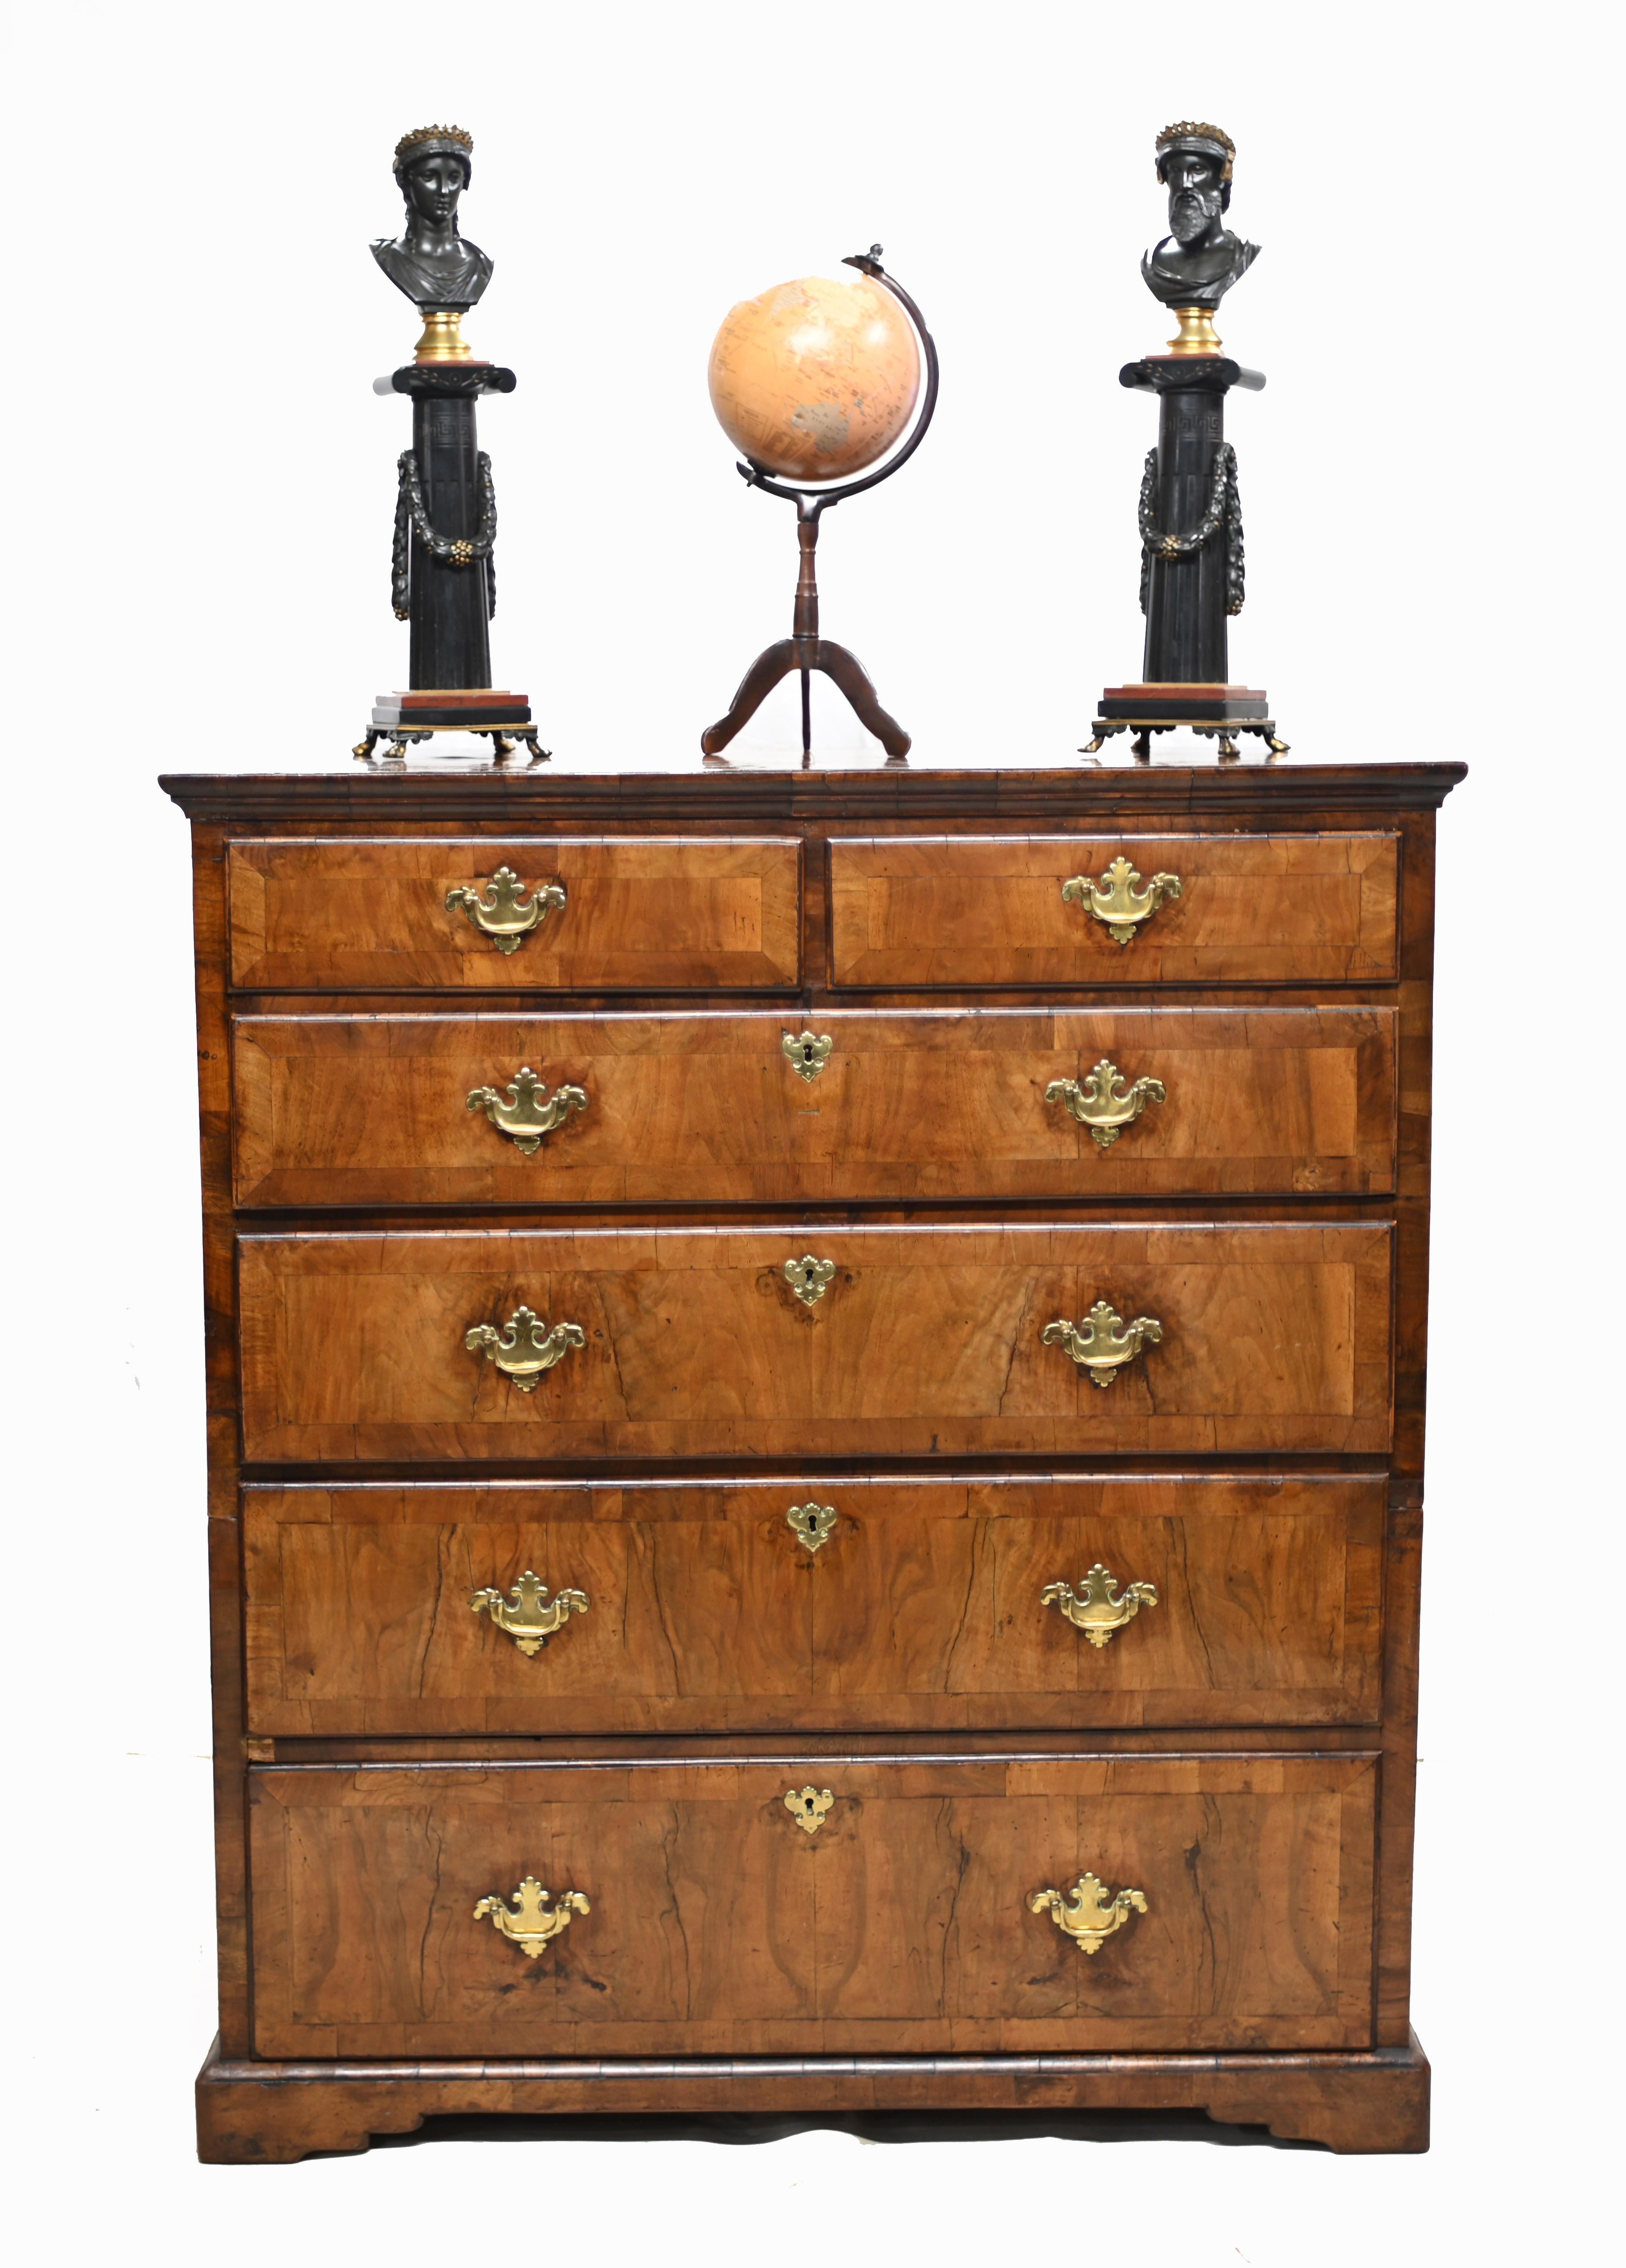 Stunning period George I walnut chest of drawers
The walnut chest is in two parts (this was common in the early days before the ease of carrying larger items to uptairs bedrooms through narrow stairways)
This particular chests is crossbranded in